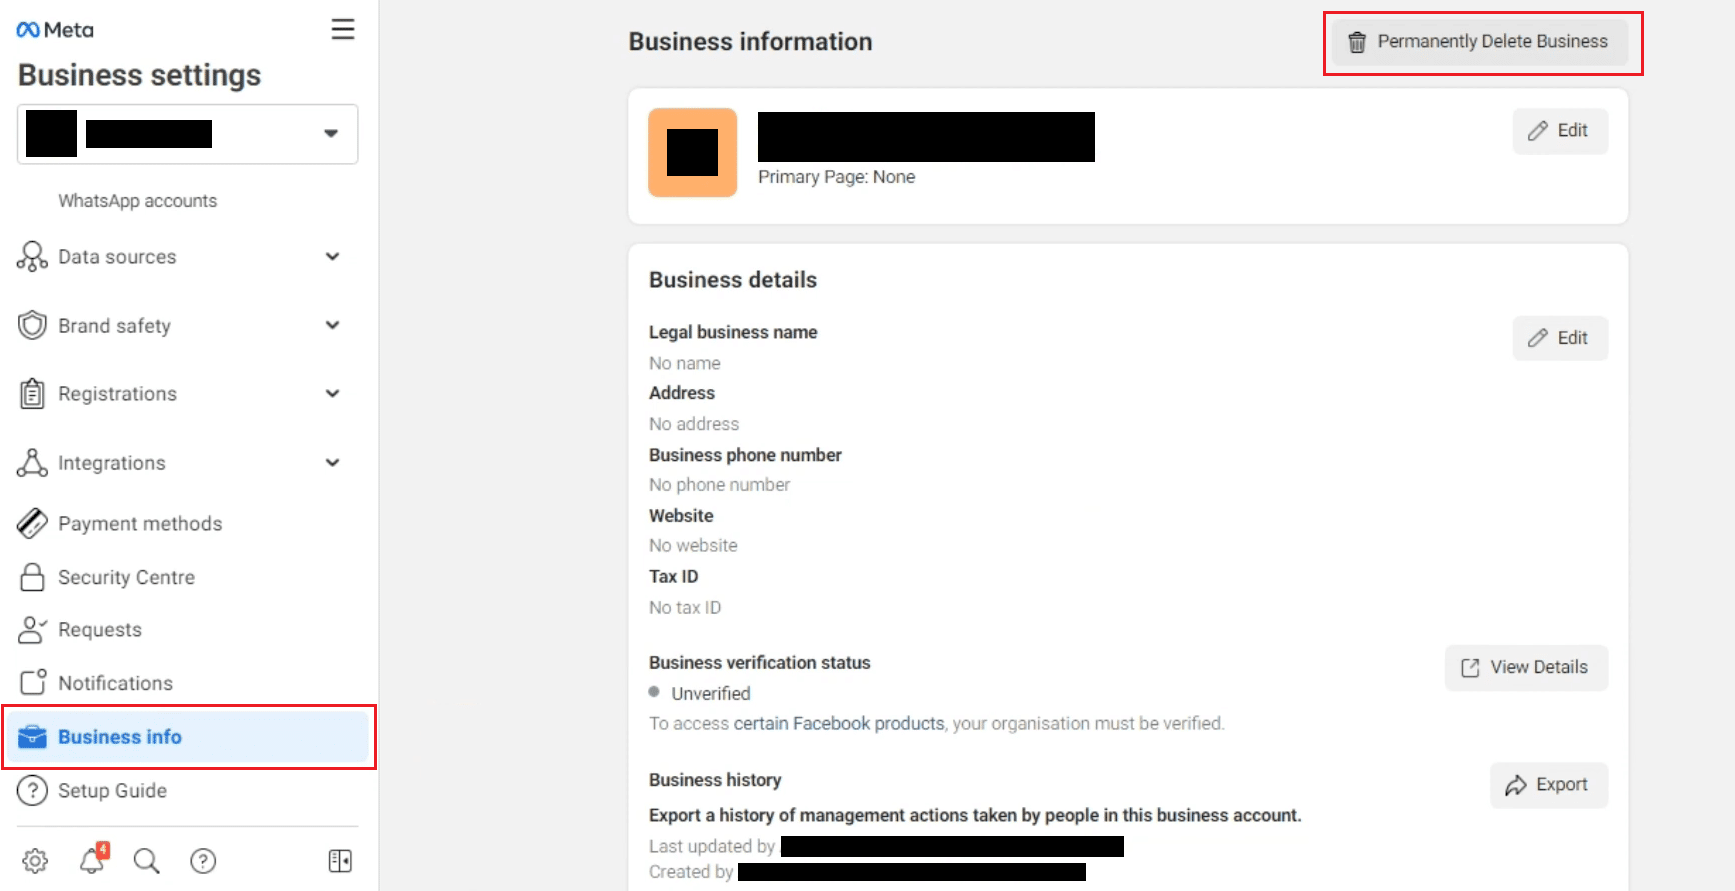 Business info - Permanently Delete Business